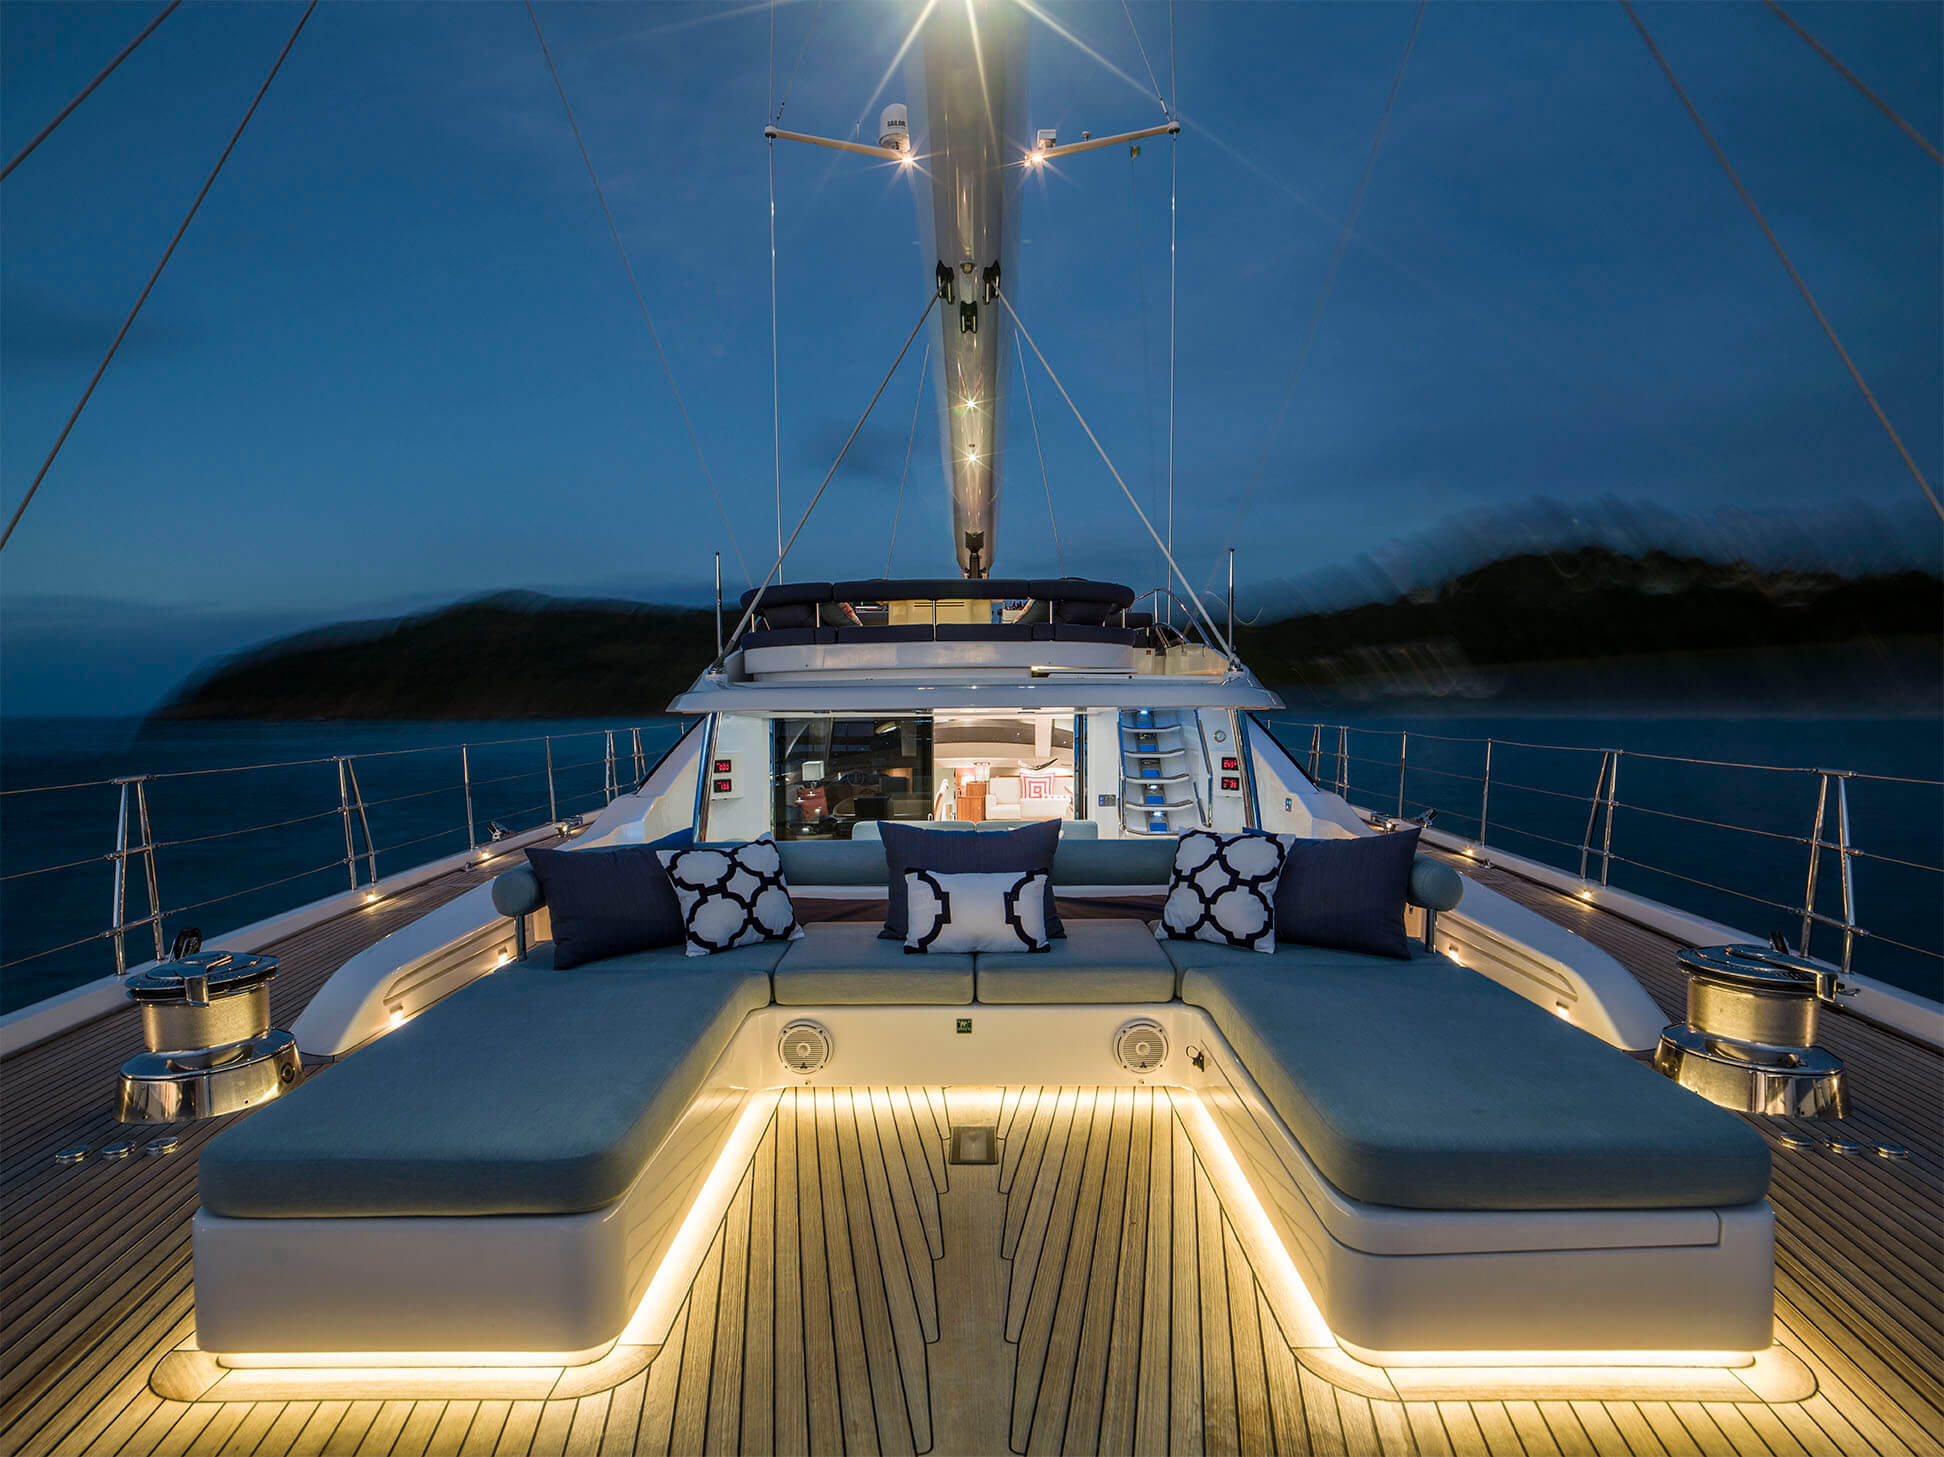 SY%20TWILIGHT%20-%20Aft%20deck%20seating